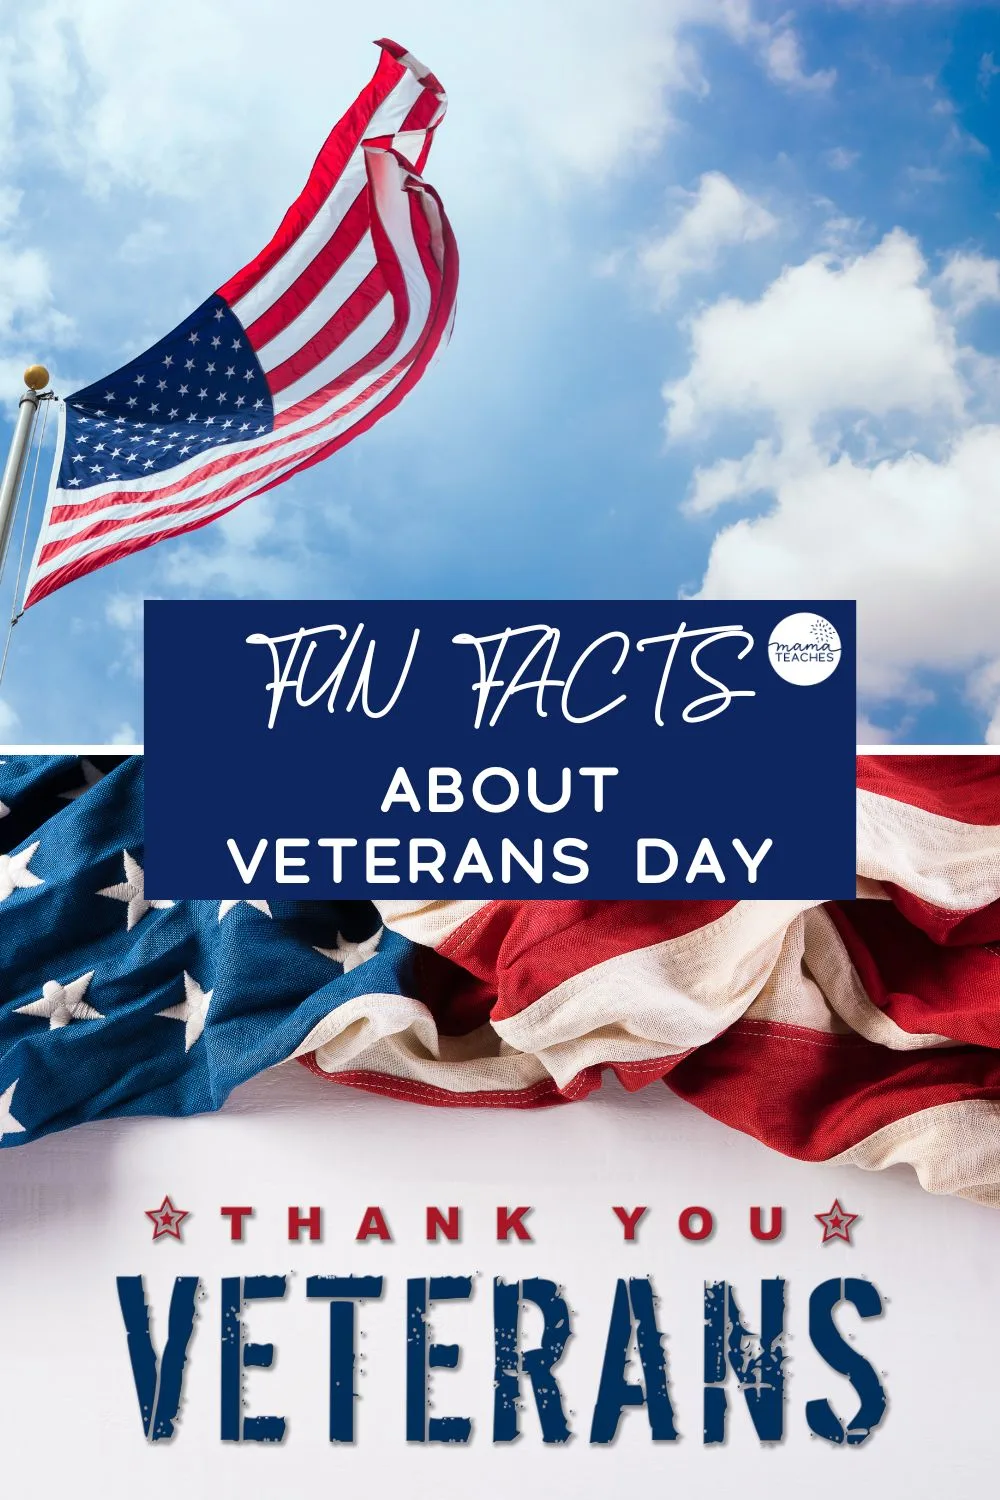 FUN FACTS ABOUT VETERANS DAY